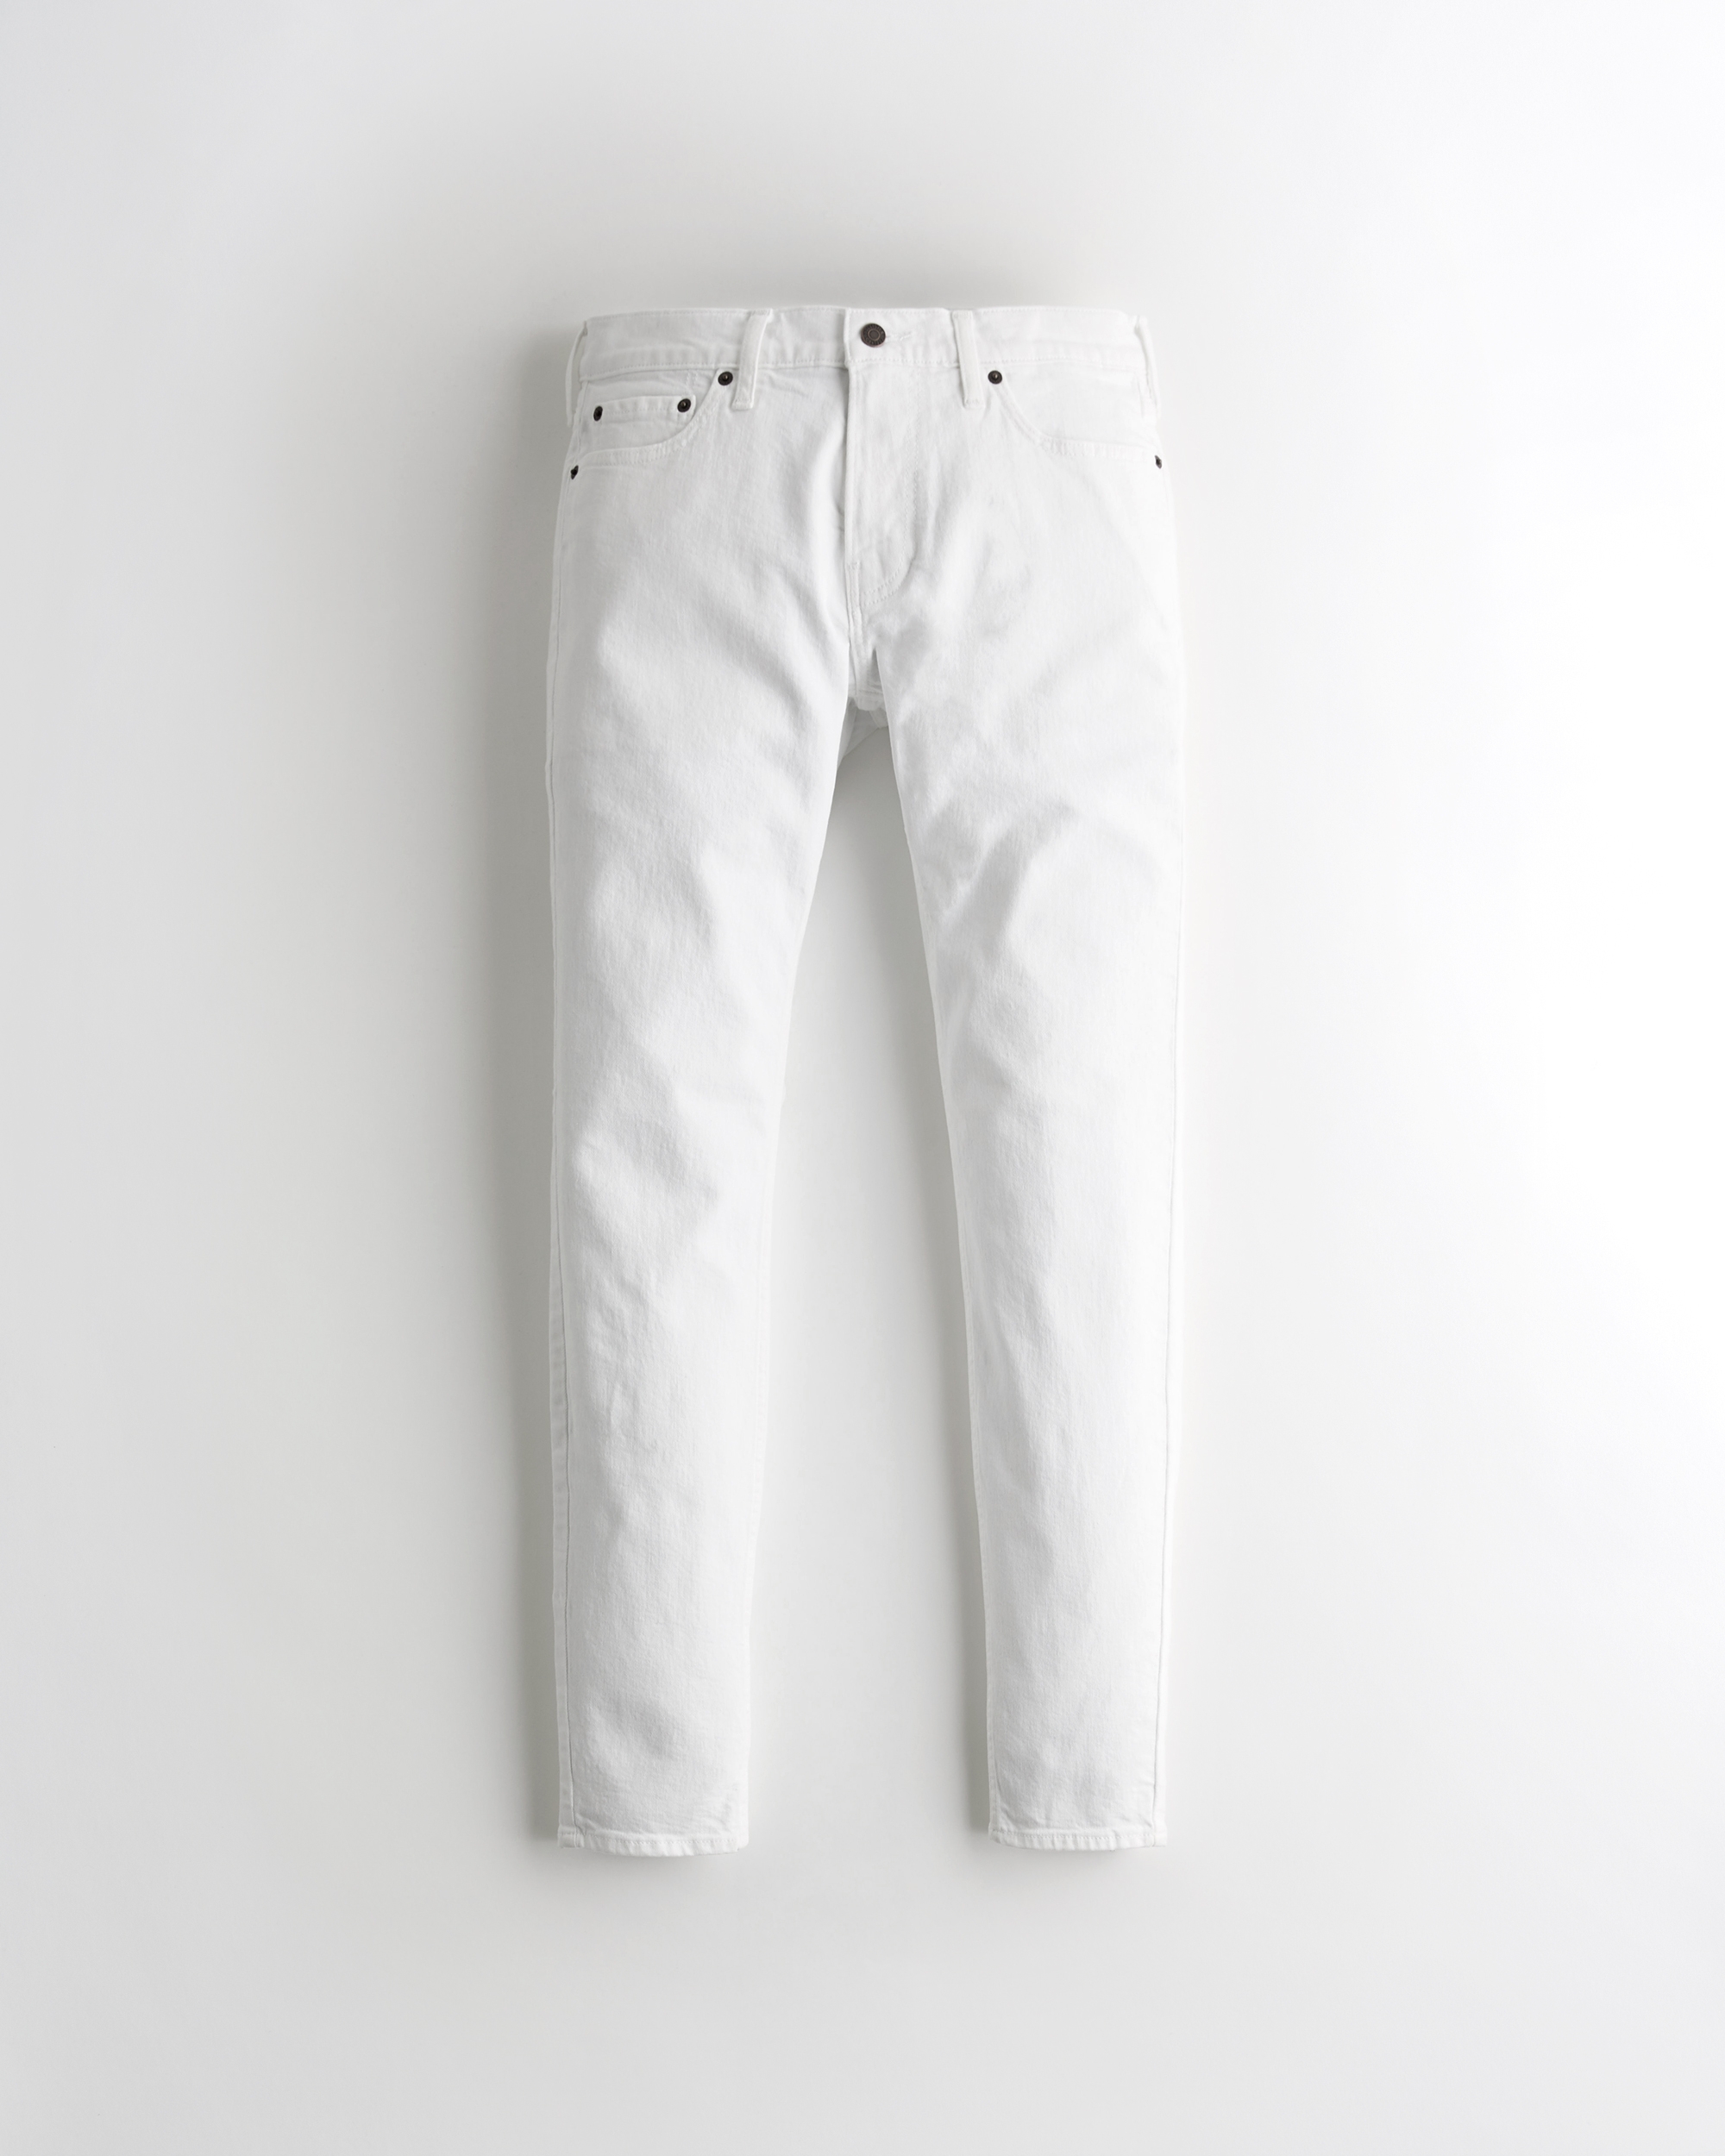 hollister white jeans